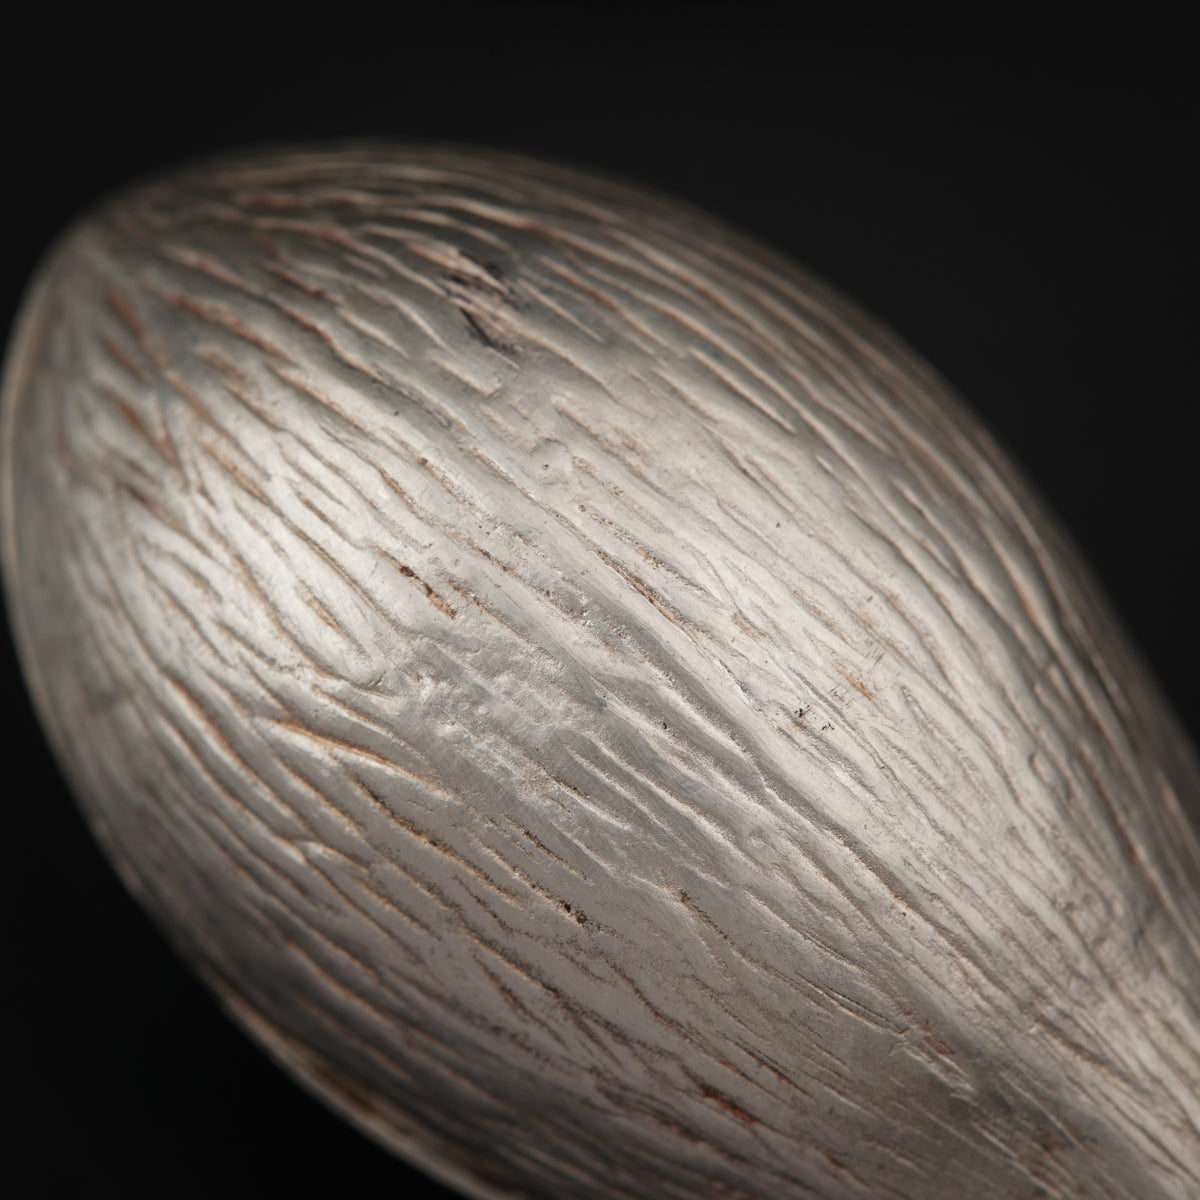 a close up of a nut shell on a black background